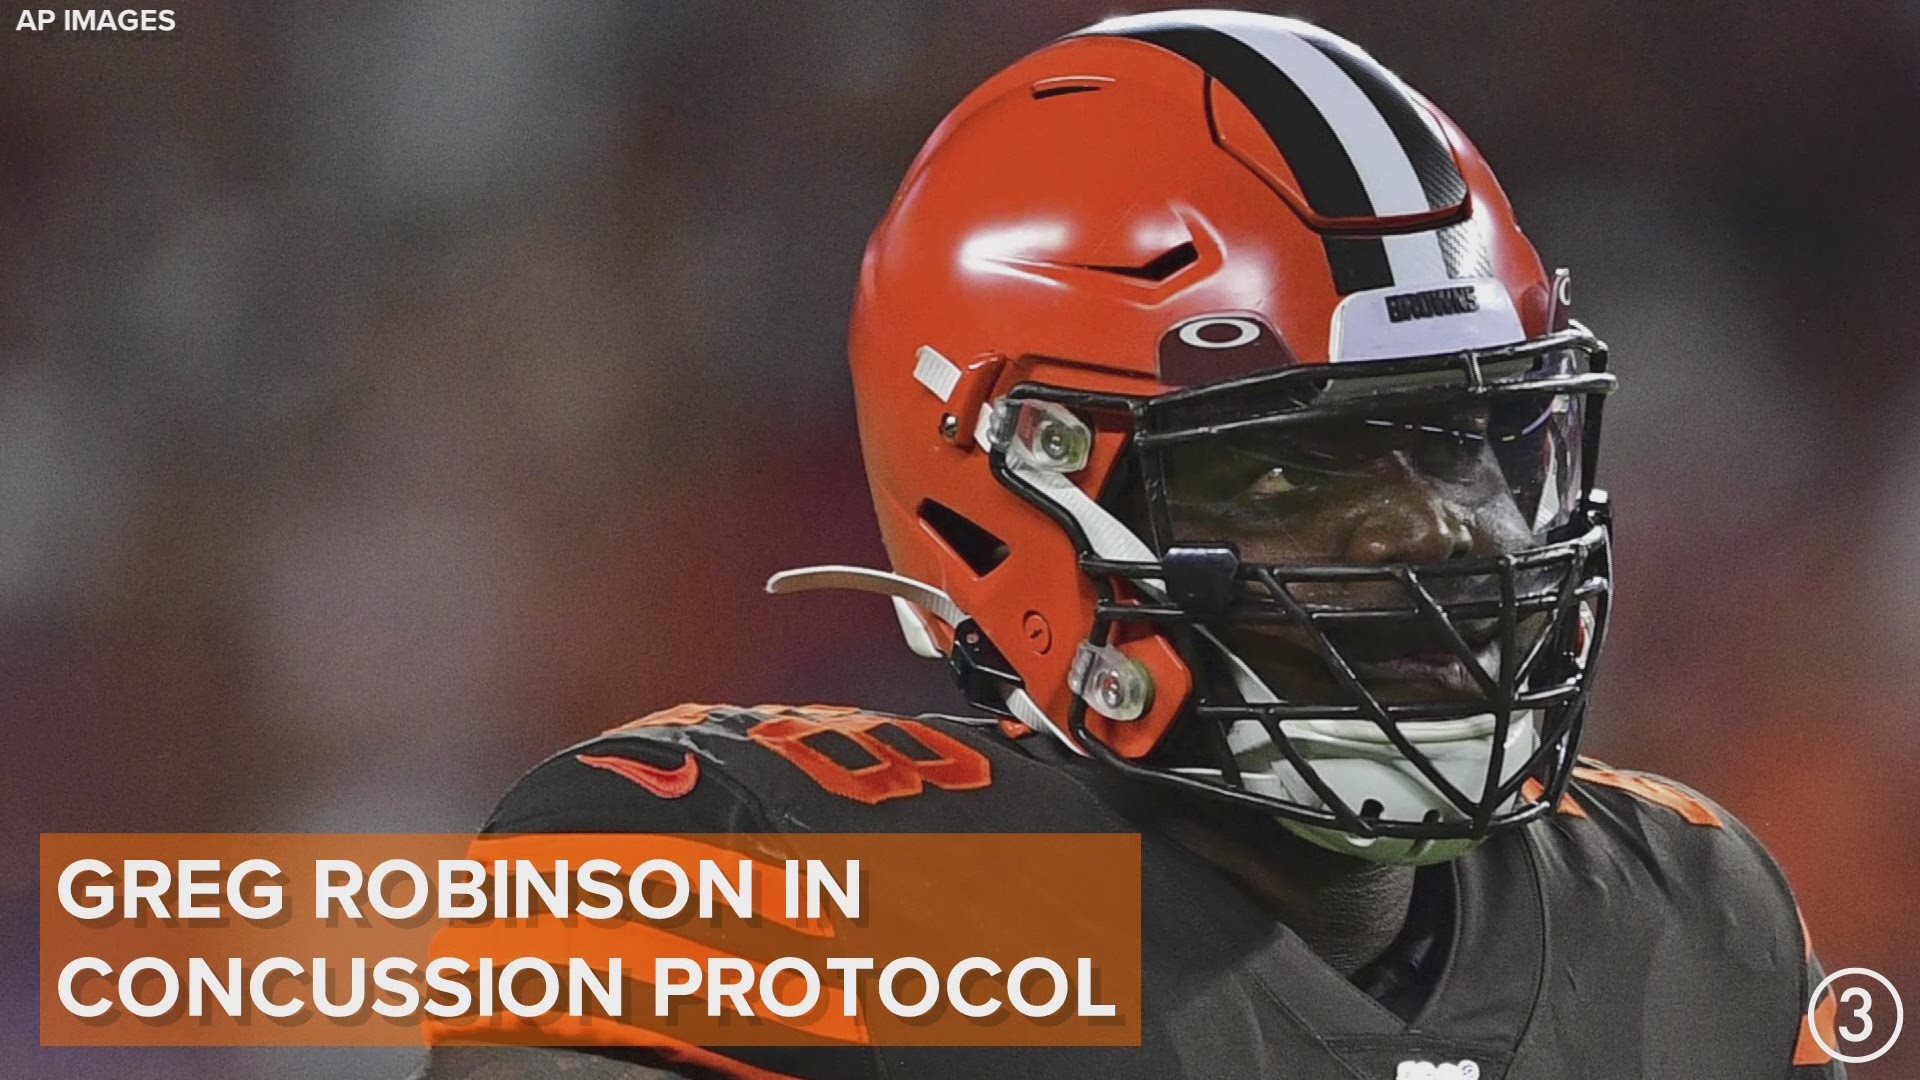 The Cleveland Browns have placed their starting left tackle Greg Robinson into concussion protocol after reporting to Berea with symptoms.